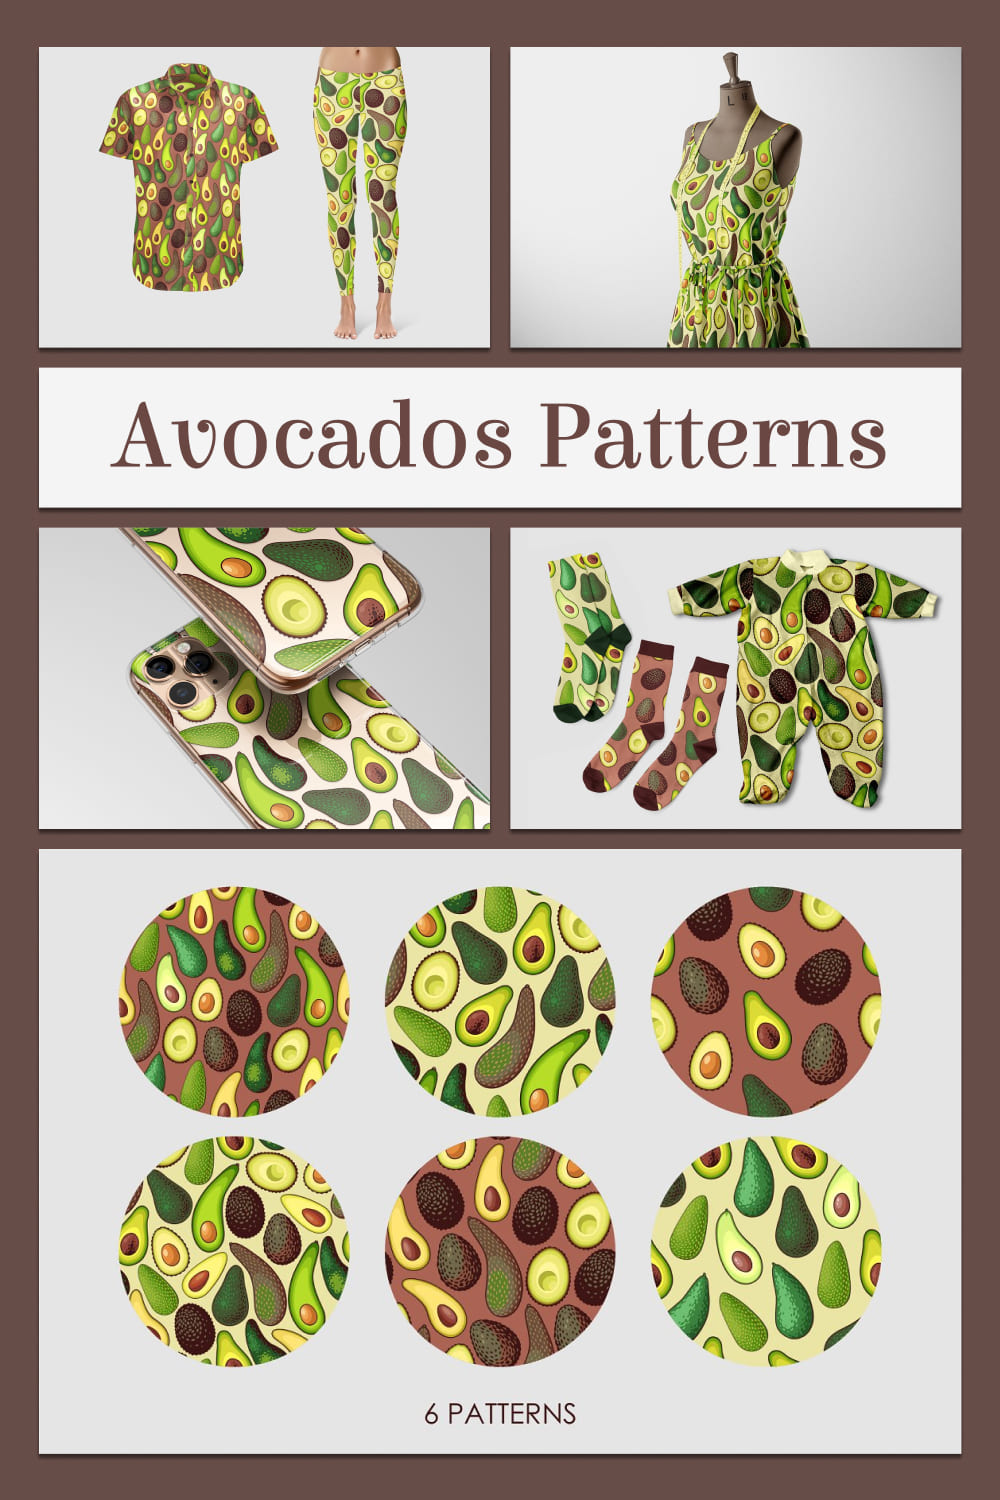 Avocados patterns - pinterest image preview.